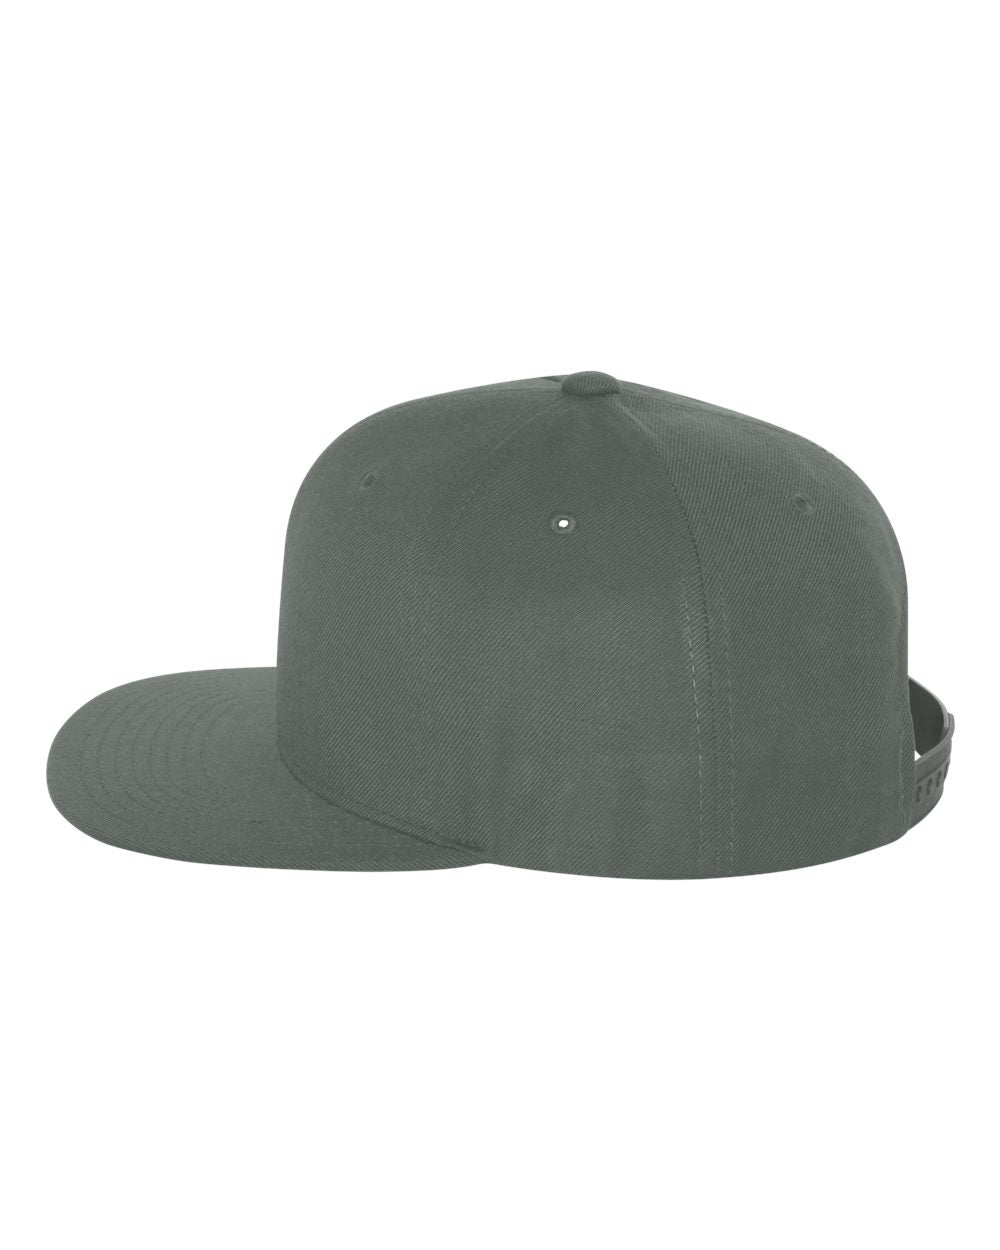 3000 Nu-Fit® Pro-Style Cotton Spandex Fitted Cap - Budget